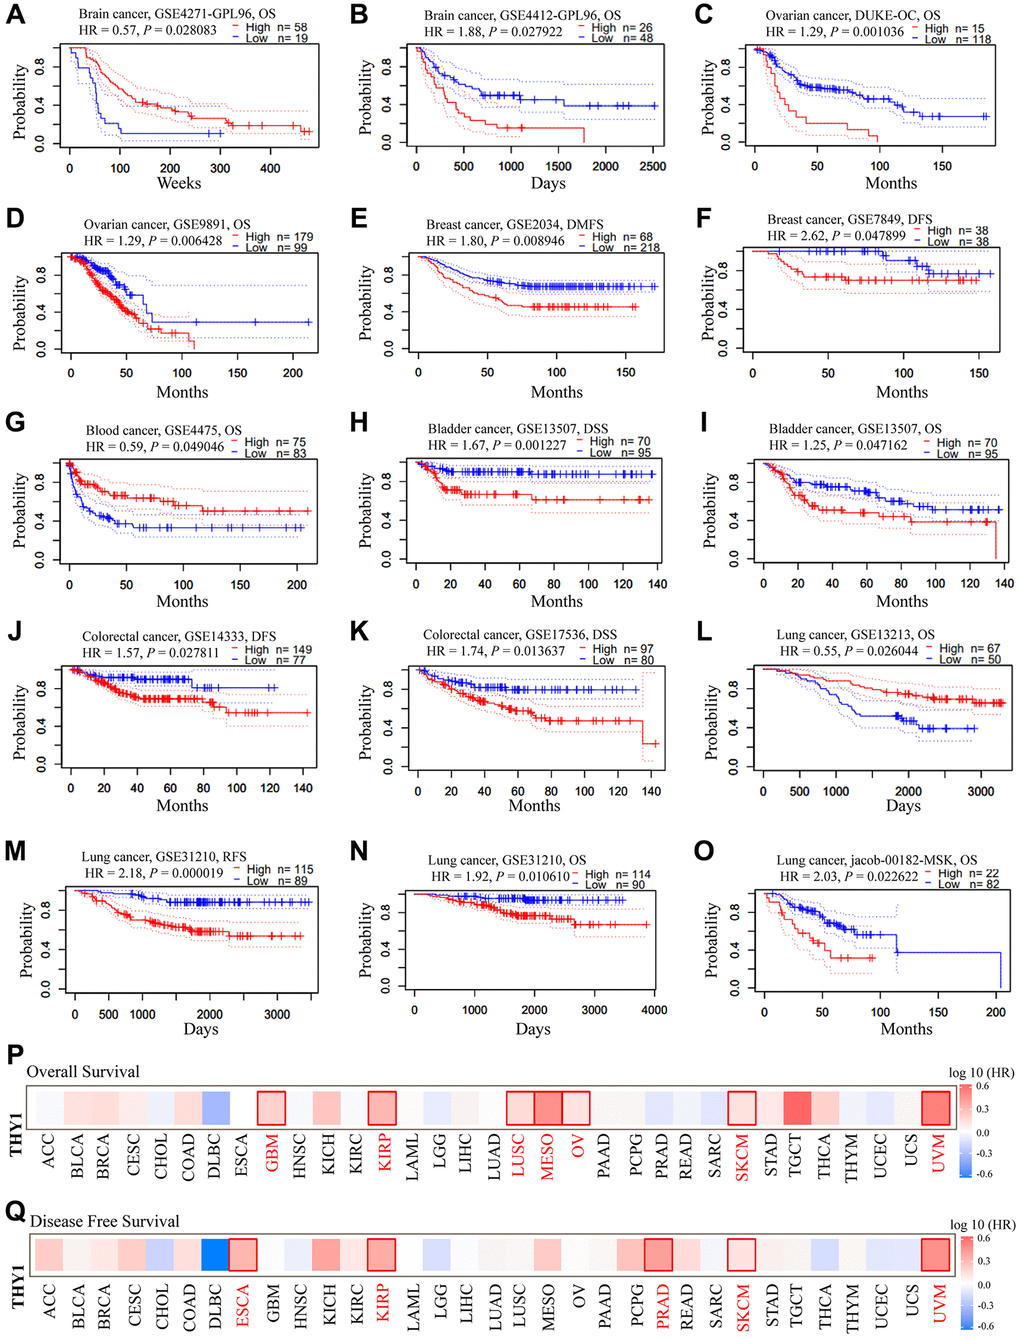 The prognostic significance of up-regulated THY1 in many types of cancers. (A–O) Relationships between higher expression of THY1 and prognosis in different types of cancers in PrognoScan database. (P) The prognostic value (OS) of differentially expressed THY1 in 33 types of cancer form TCGA in GEPIA database. (Q) The prognostic value (DFS) of differentially expressed THY1 in 33 types of cancer from TCGA in GEPIA database. Abbreviations: OS: overall survival; DFS: disease-free survival; DMFS: disease-metastasis free survival; DSS: disease specific survival; RFS: relapse free survival.